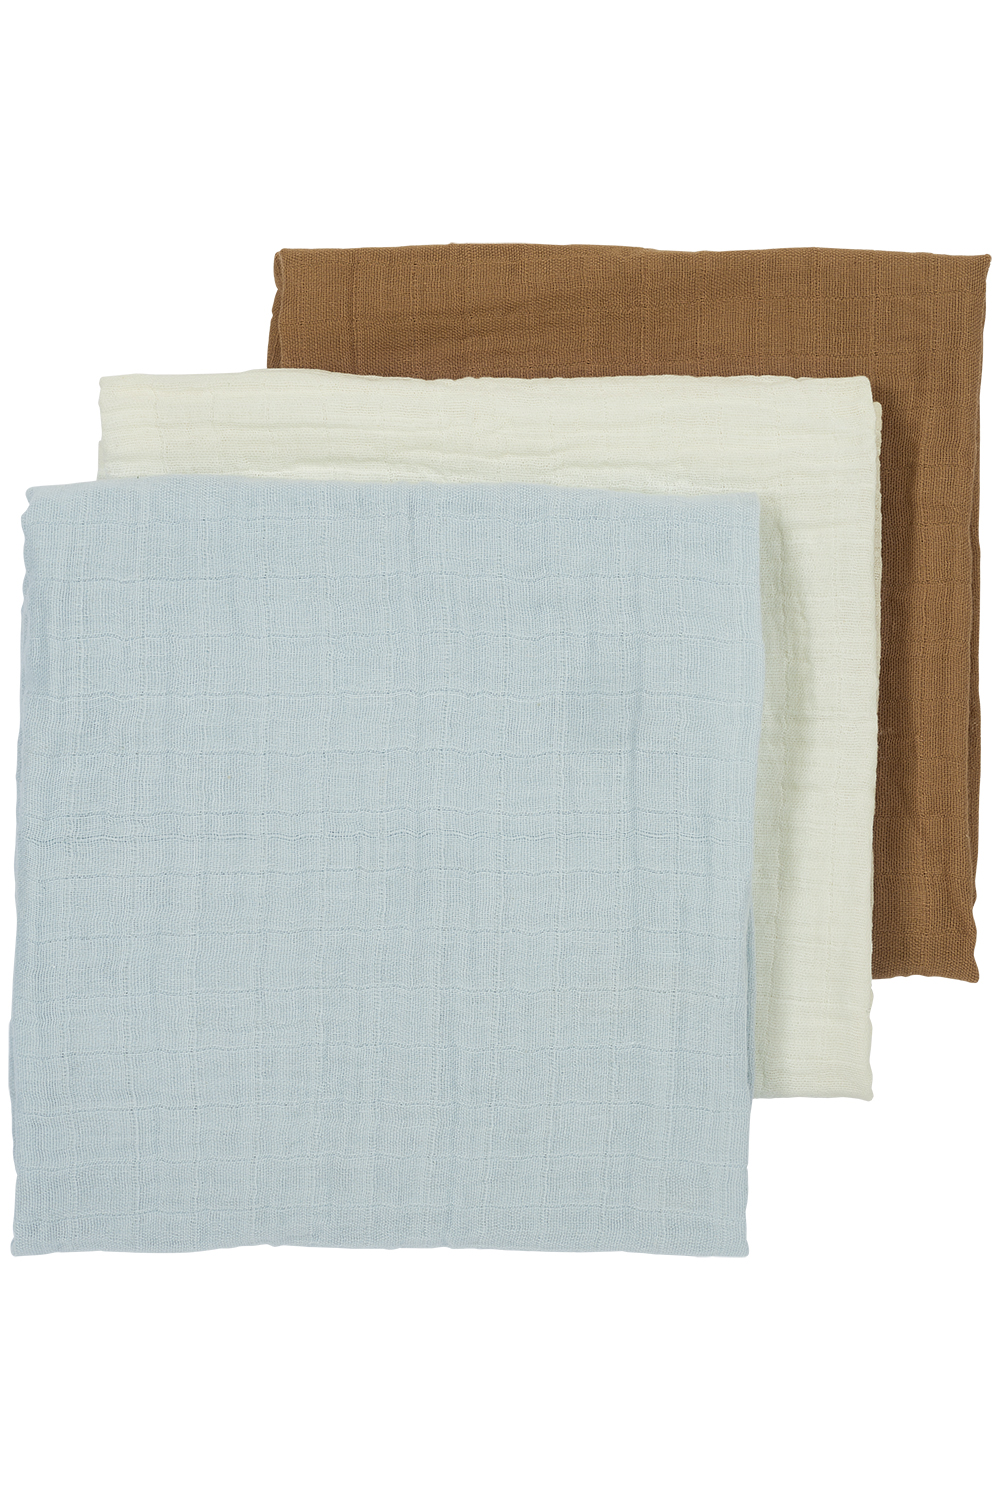 Square 3-pack Uni - offwhite/light blue/toffee - 70x70cm